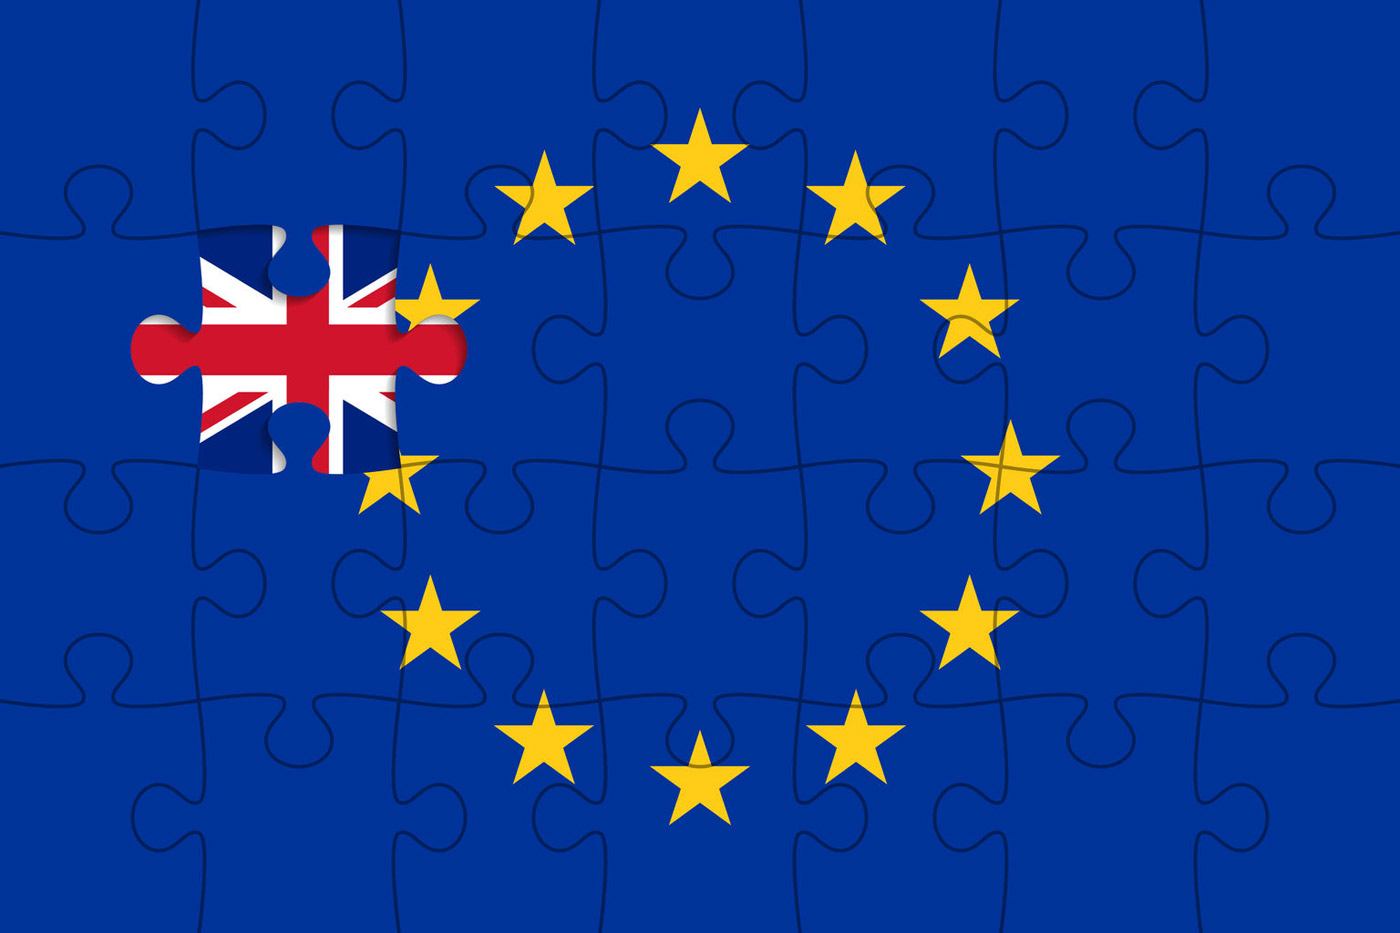 Online gambling in the UK and EU after Brexit